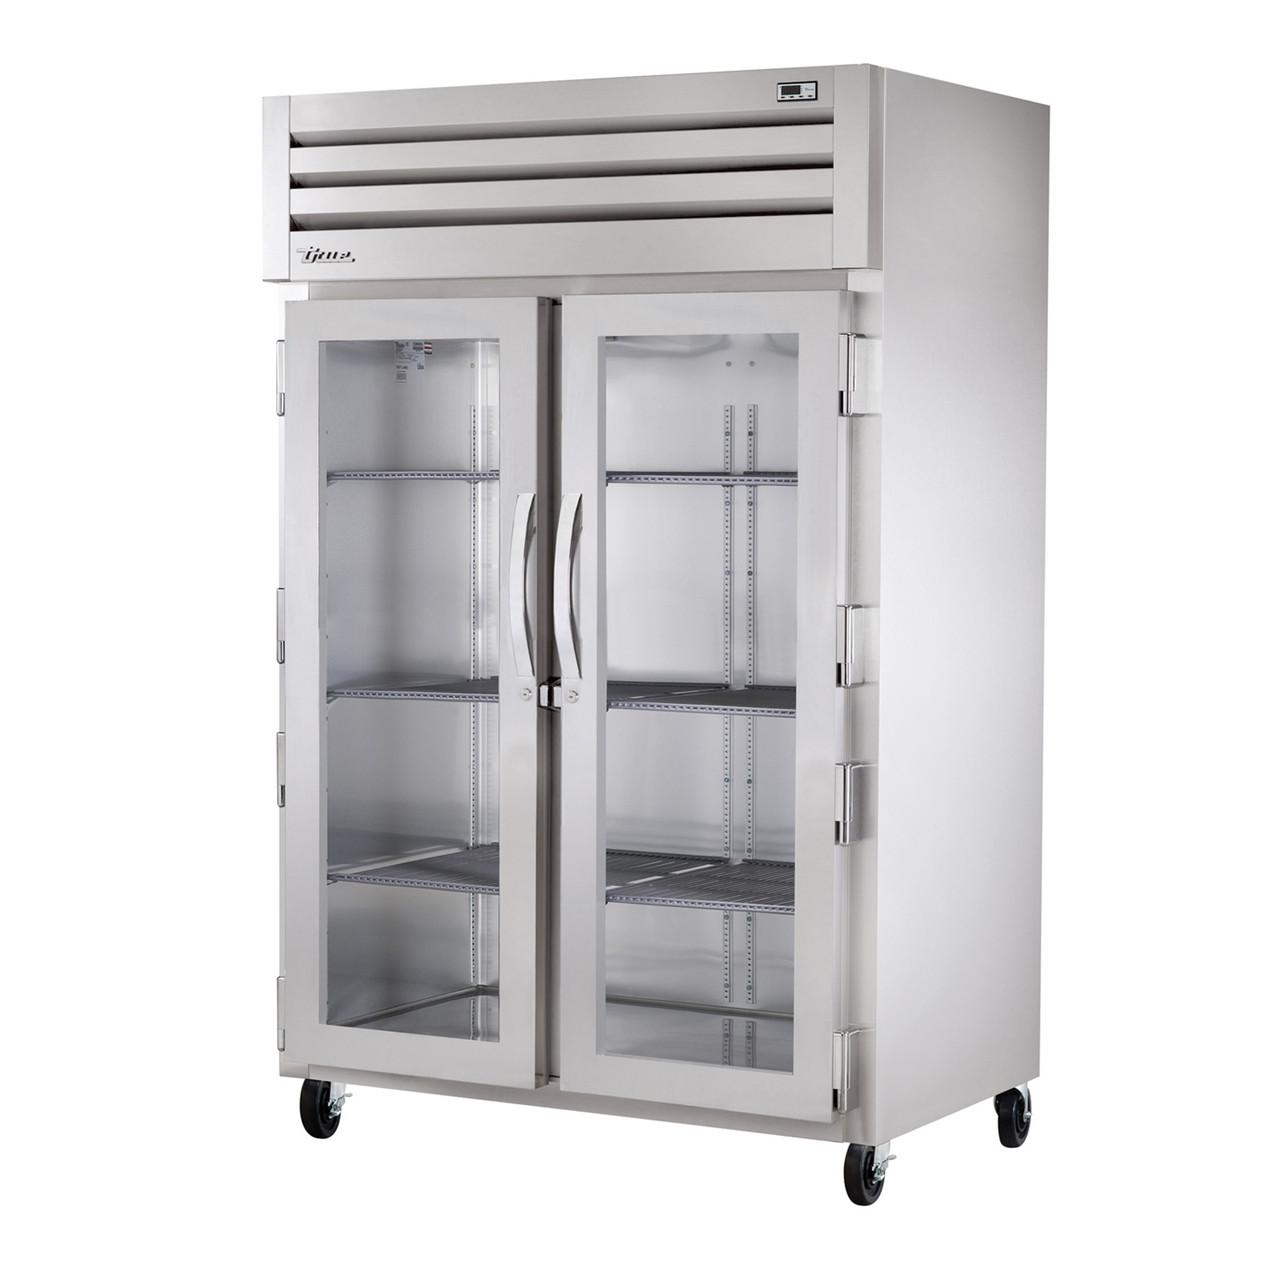 True Manufacturing STR2H-2G Spec Series 2 Section Heated Reach In Cabinet with Glass Doors - All Stainless